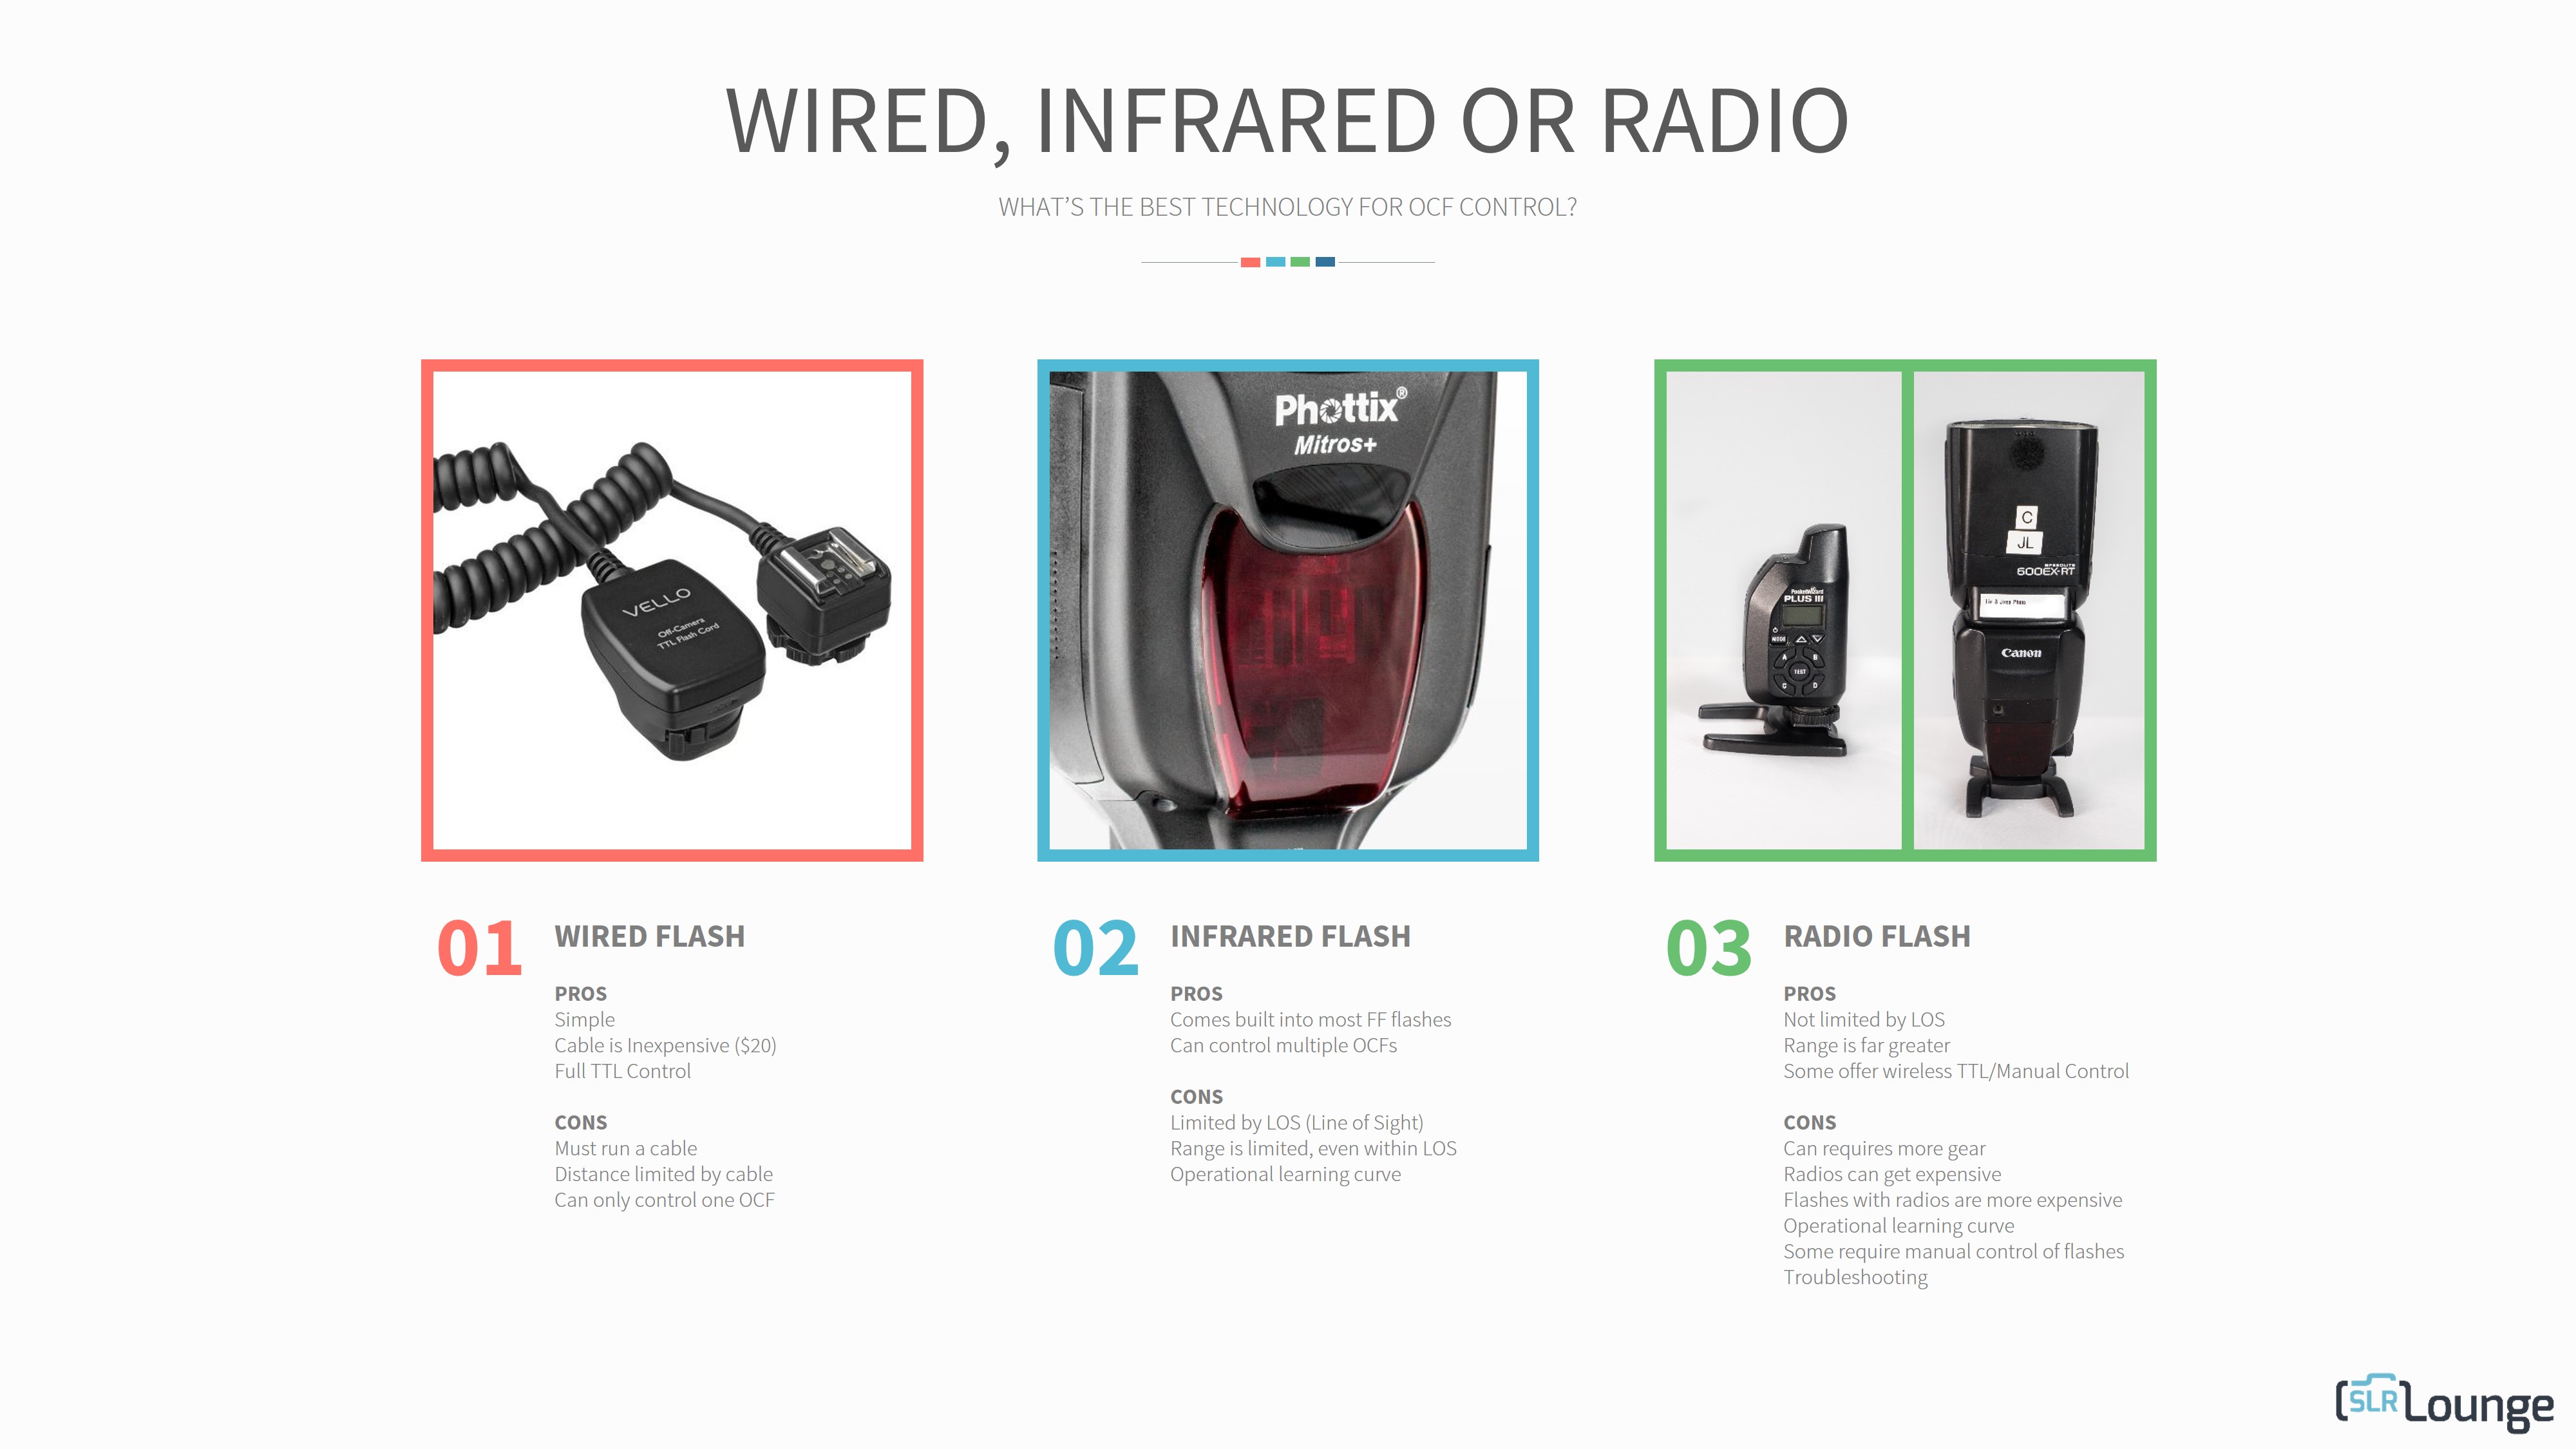 Lighting 201: Wired, Infrared or Radio?